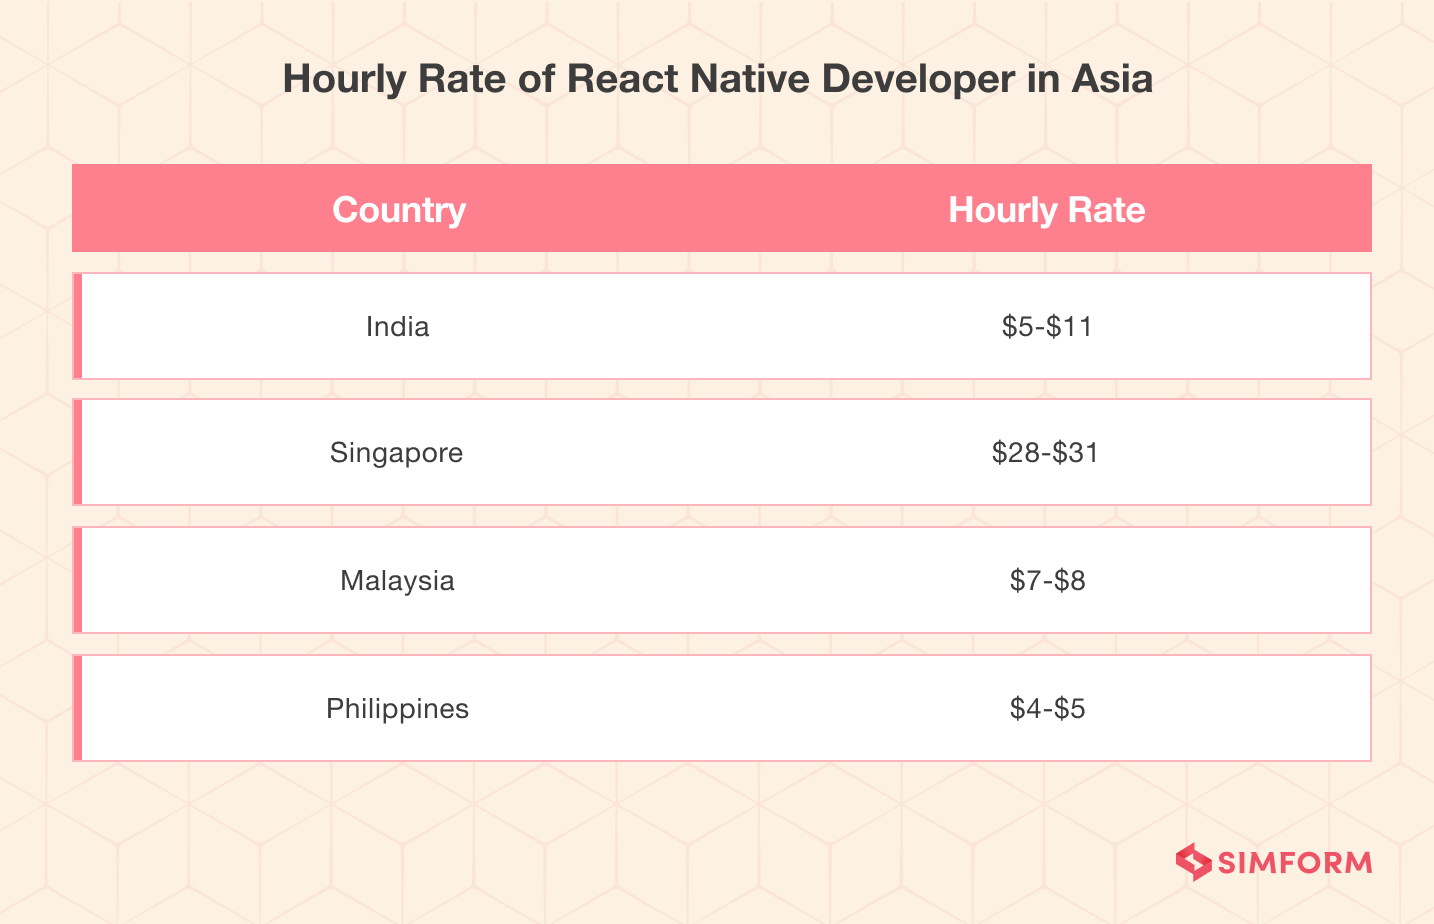 Hourly-Rate-of-React-Native-Developers-in-Asia